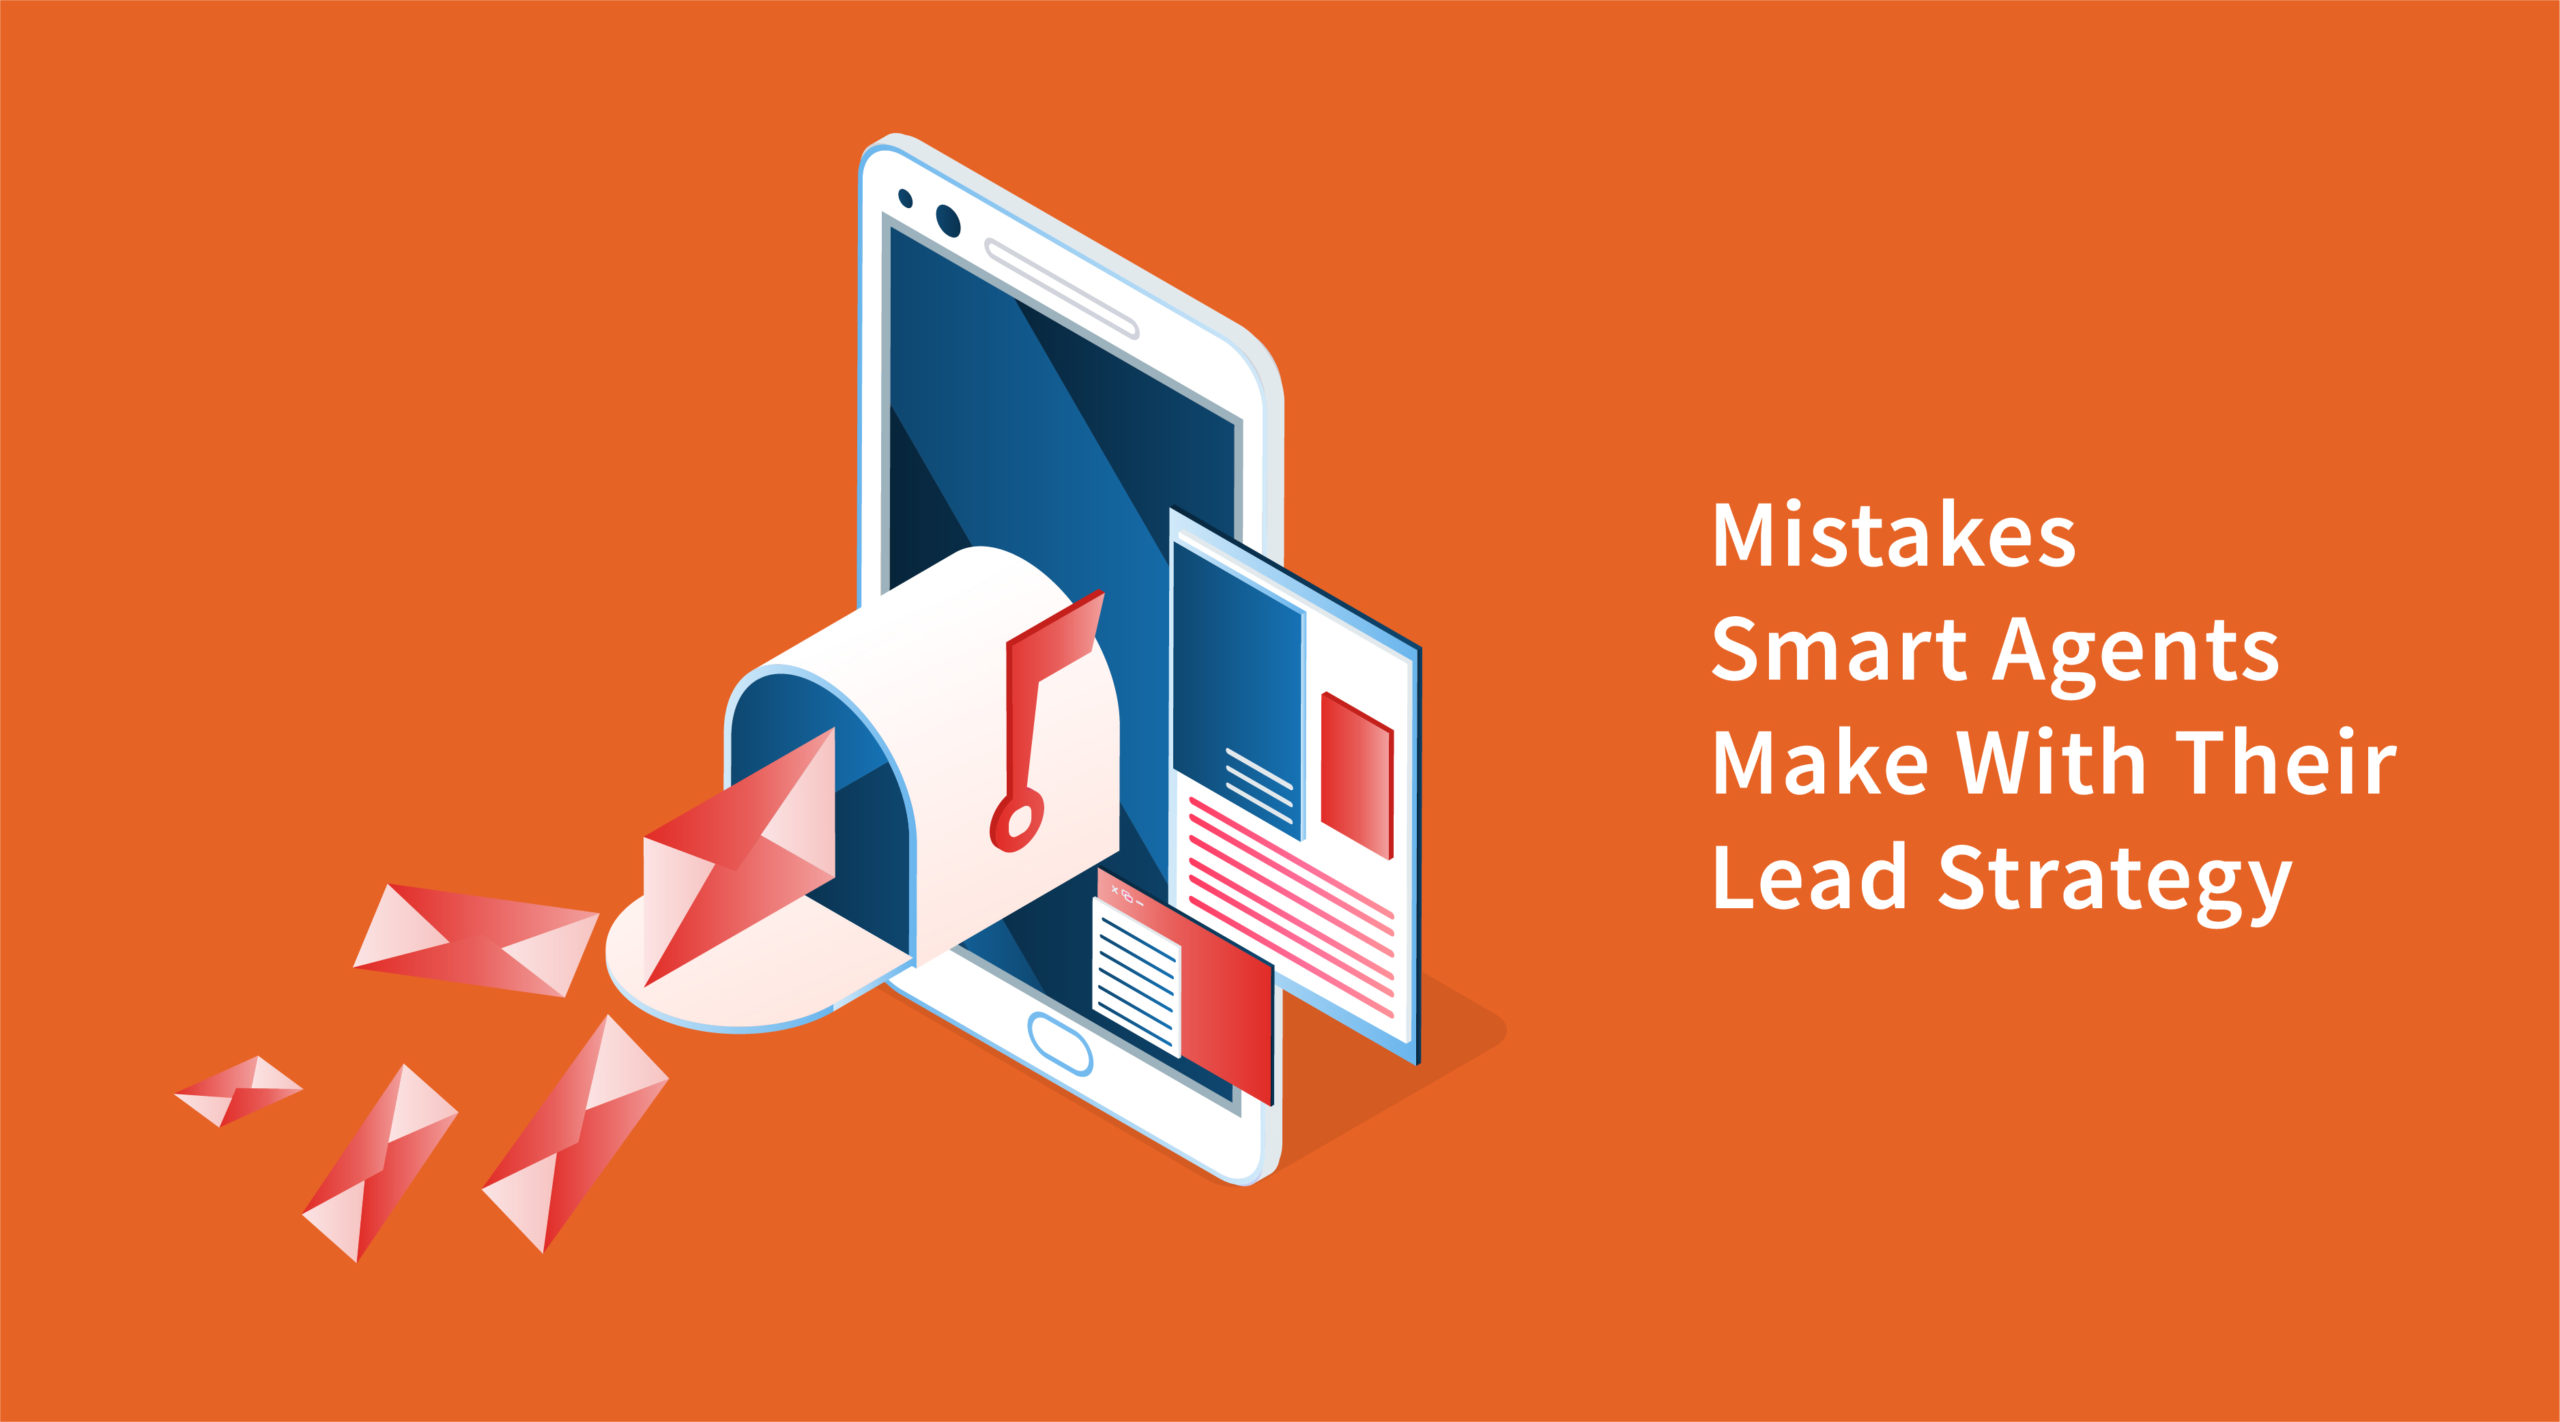 Top 4 Mistakes Smart Agents Make With Their Lead Strategy Featured Image